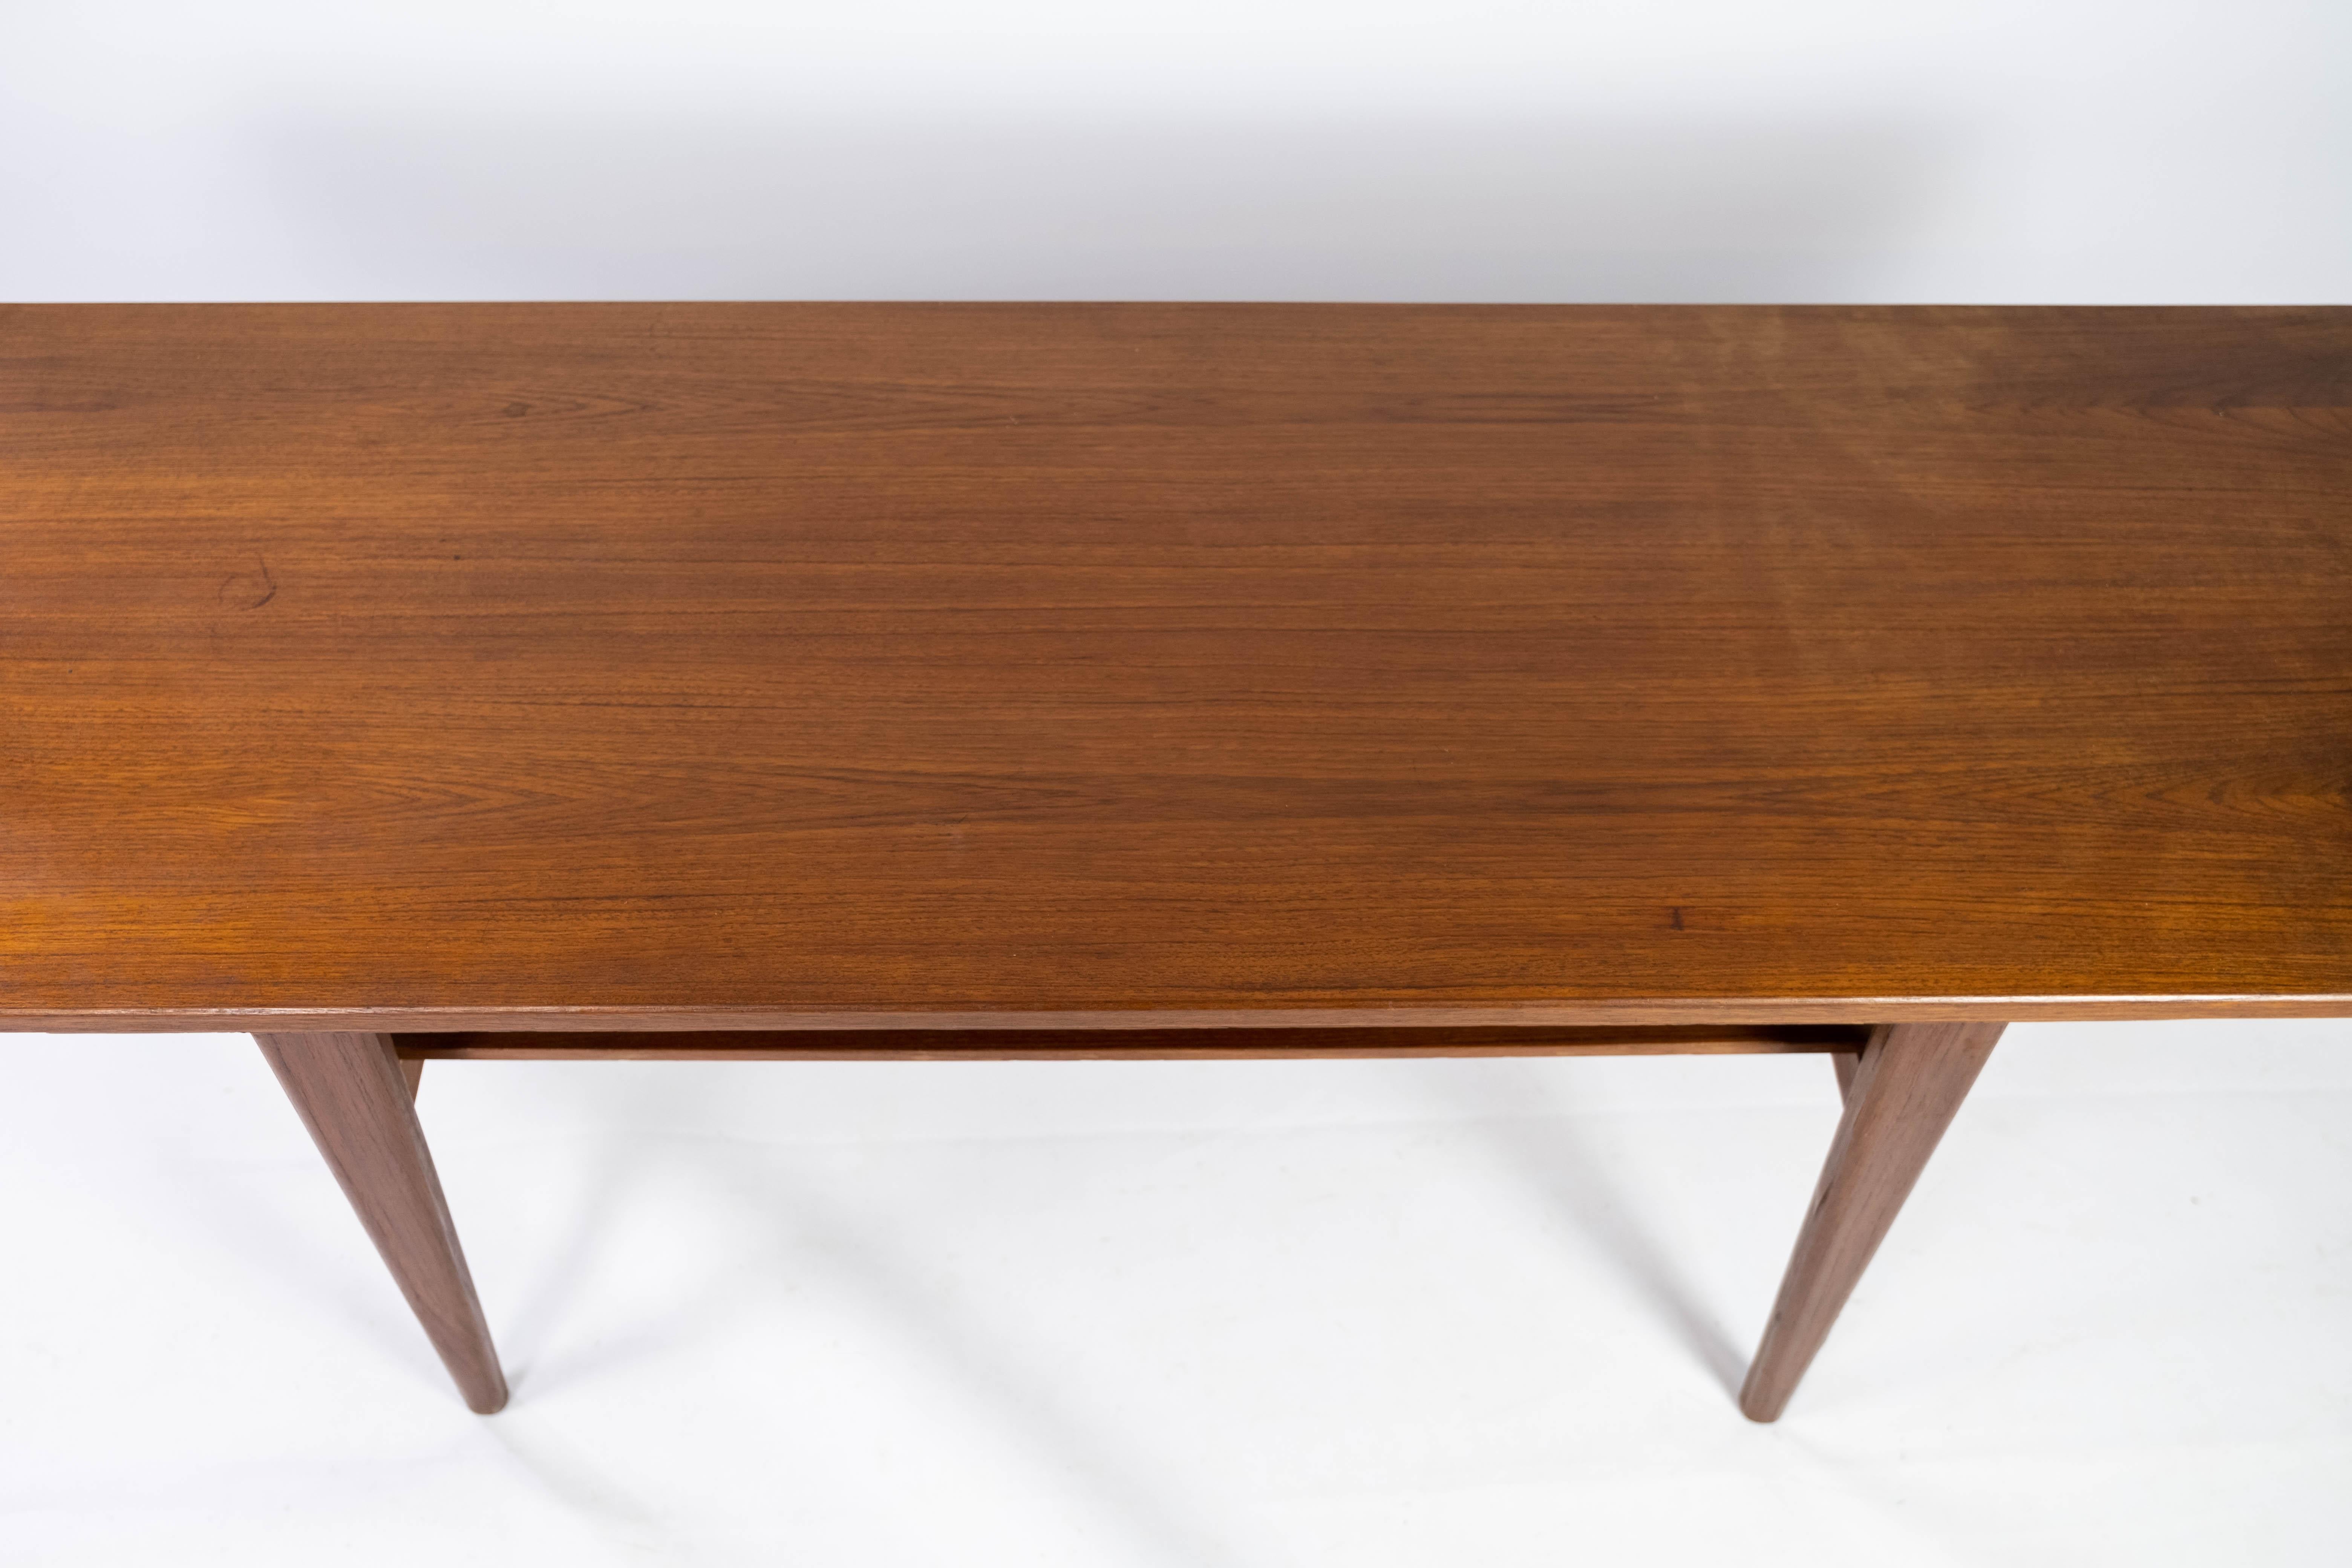 Mid-20th Century Coffee Table Made In Teak With Shelf, Danish Design From 1960s For Sale